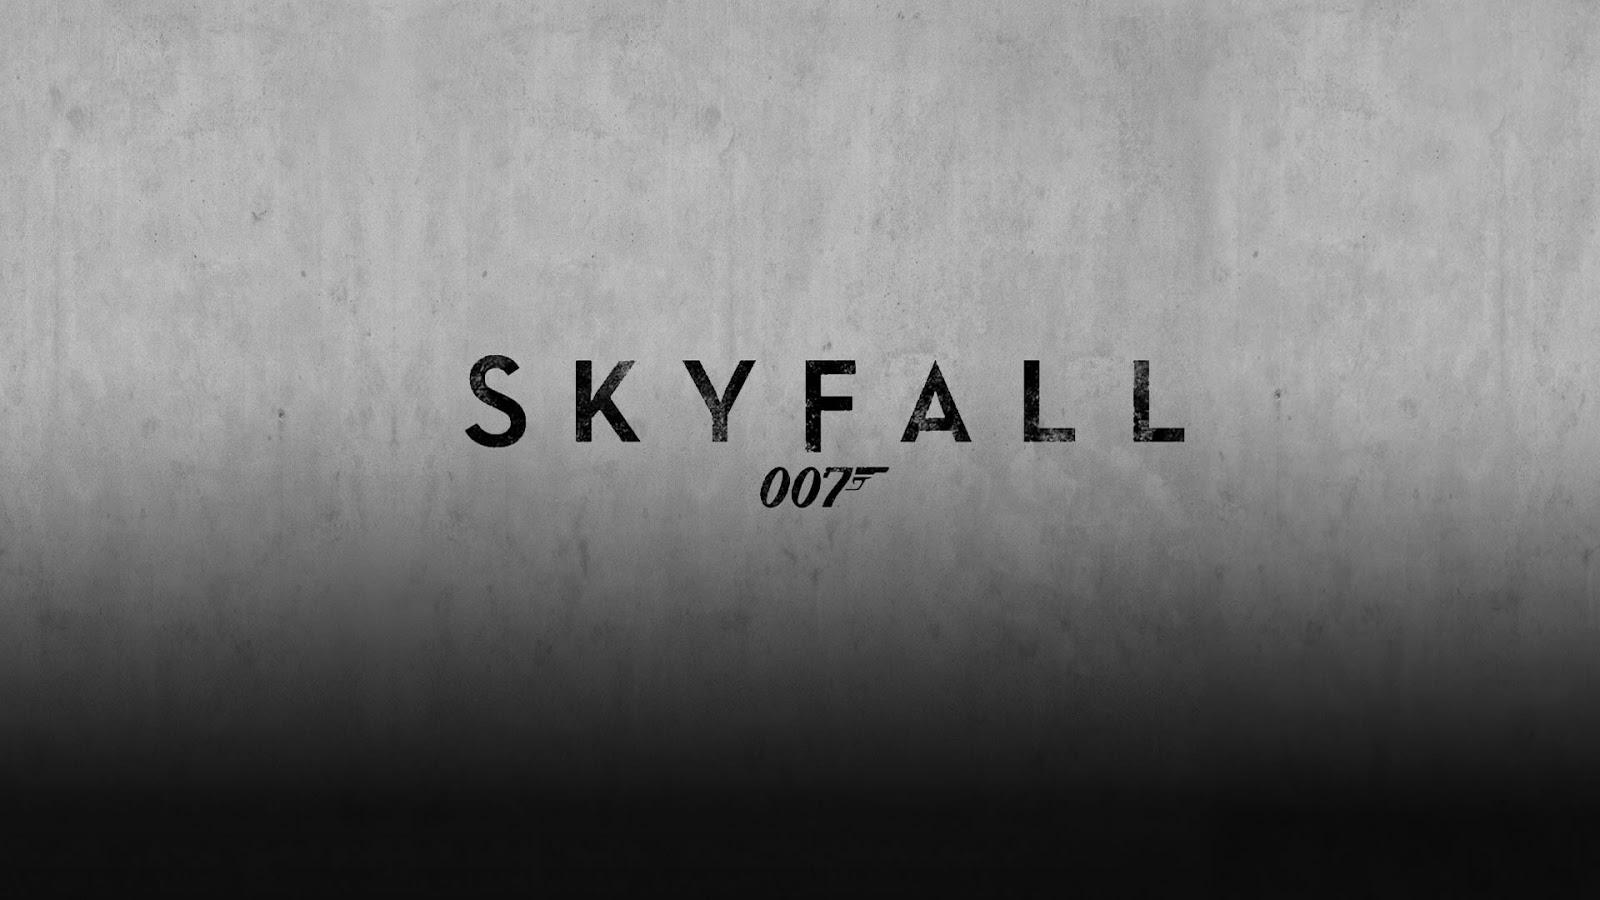 HD Wallpapers for iPhone 5 - James Bond 007 Skyfall Wallpapers | Free ...